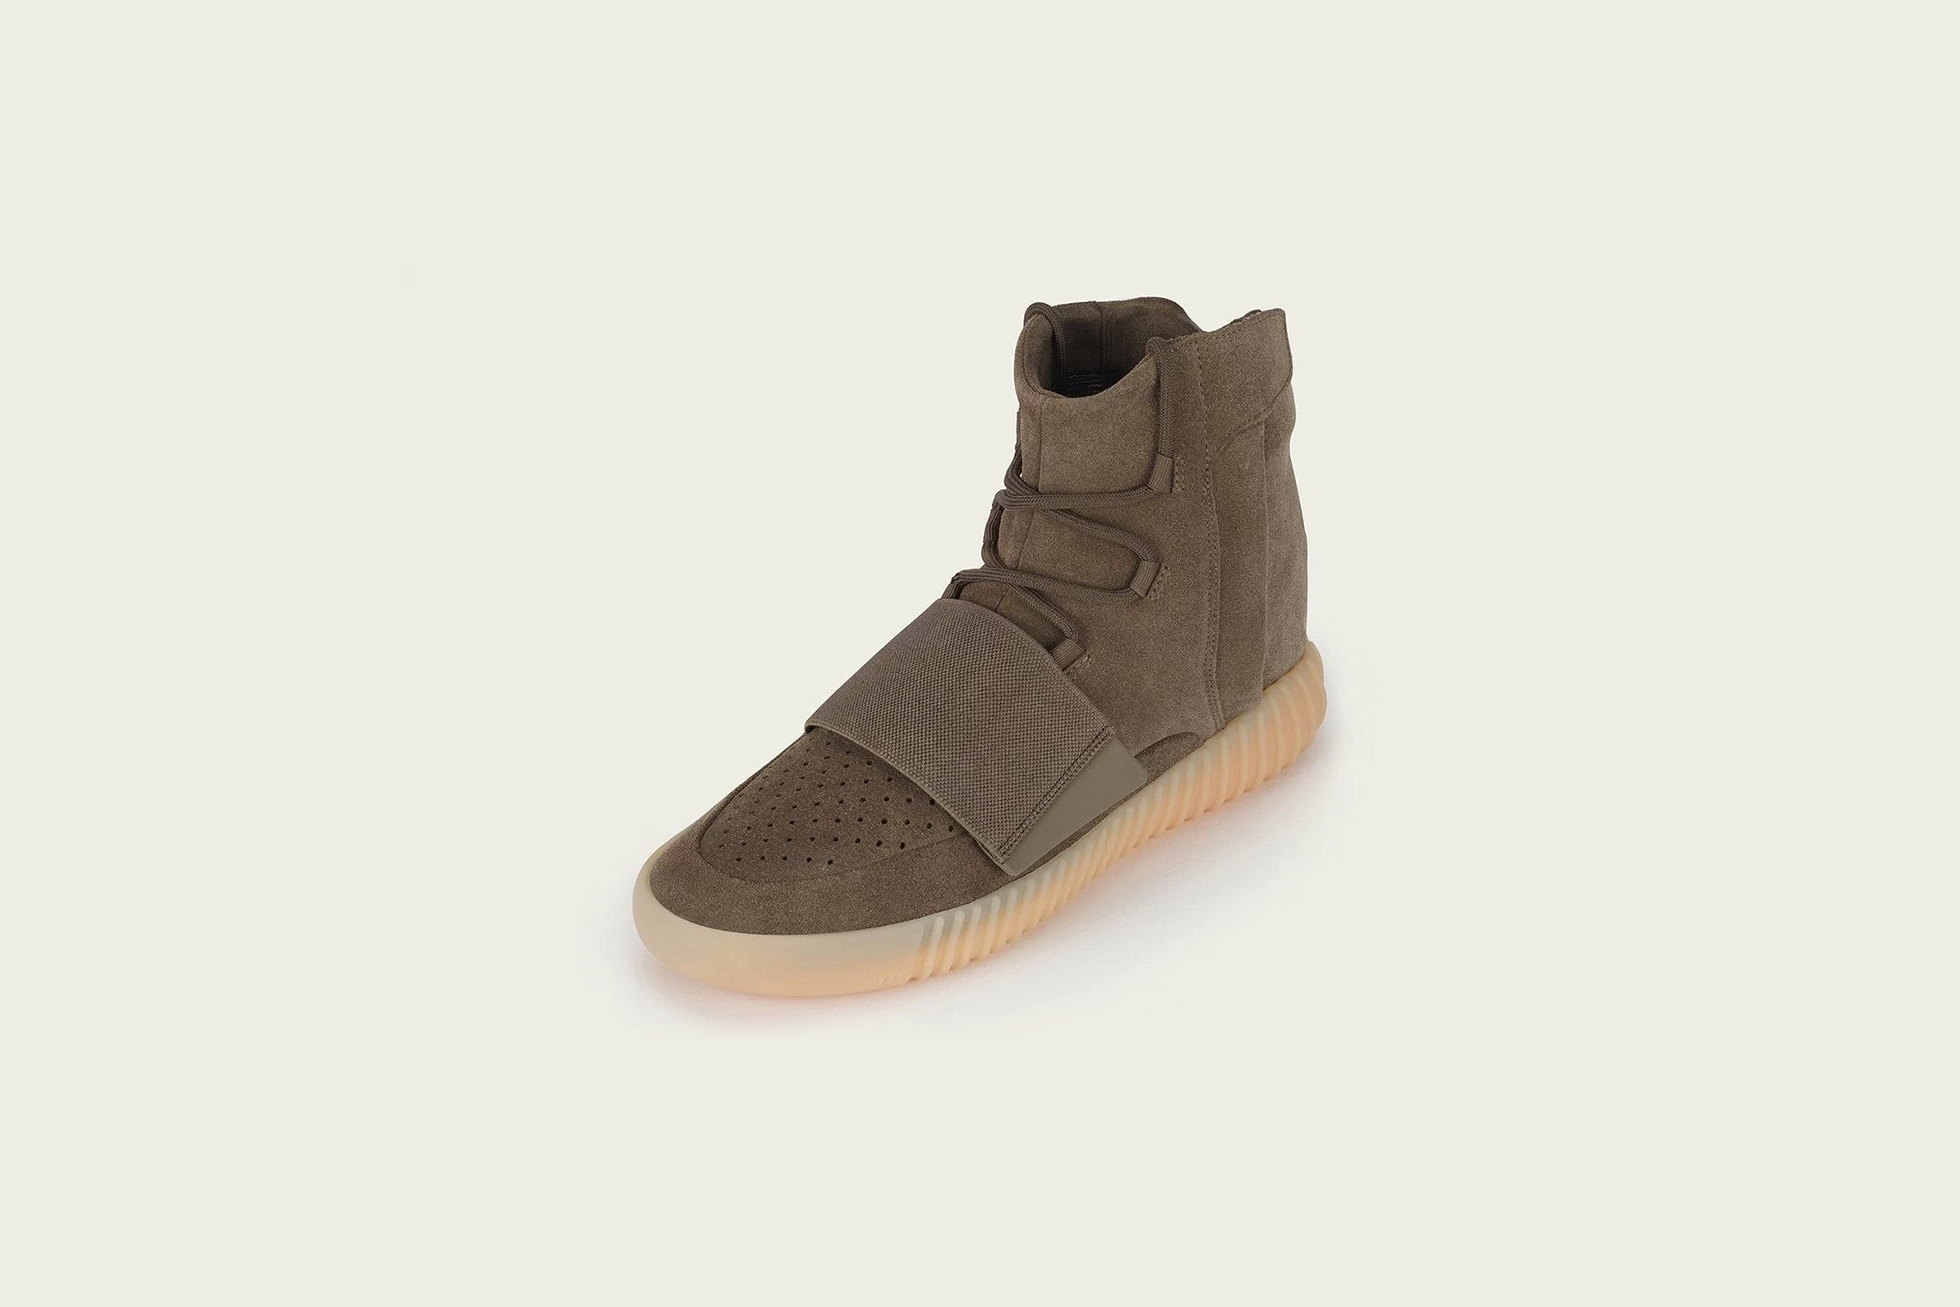 adidas Yeezy Boost 750 Brown 2